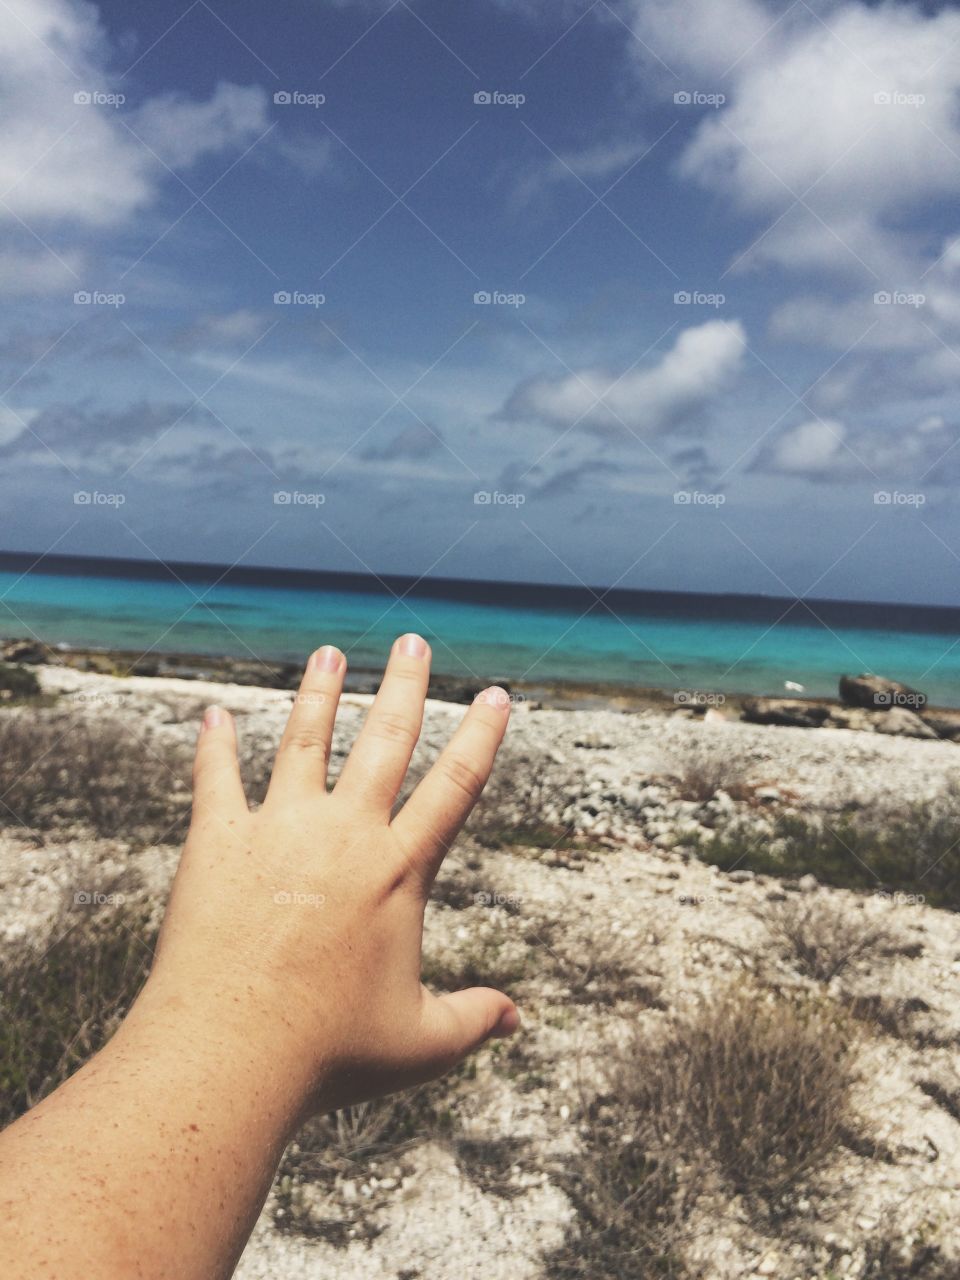 The ocean on the island of Bonaire. Bluer than blue, a freckled hand reaching out toward the sea